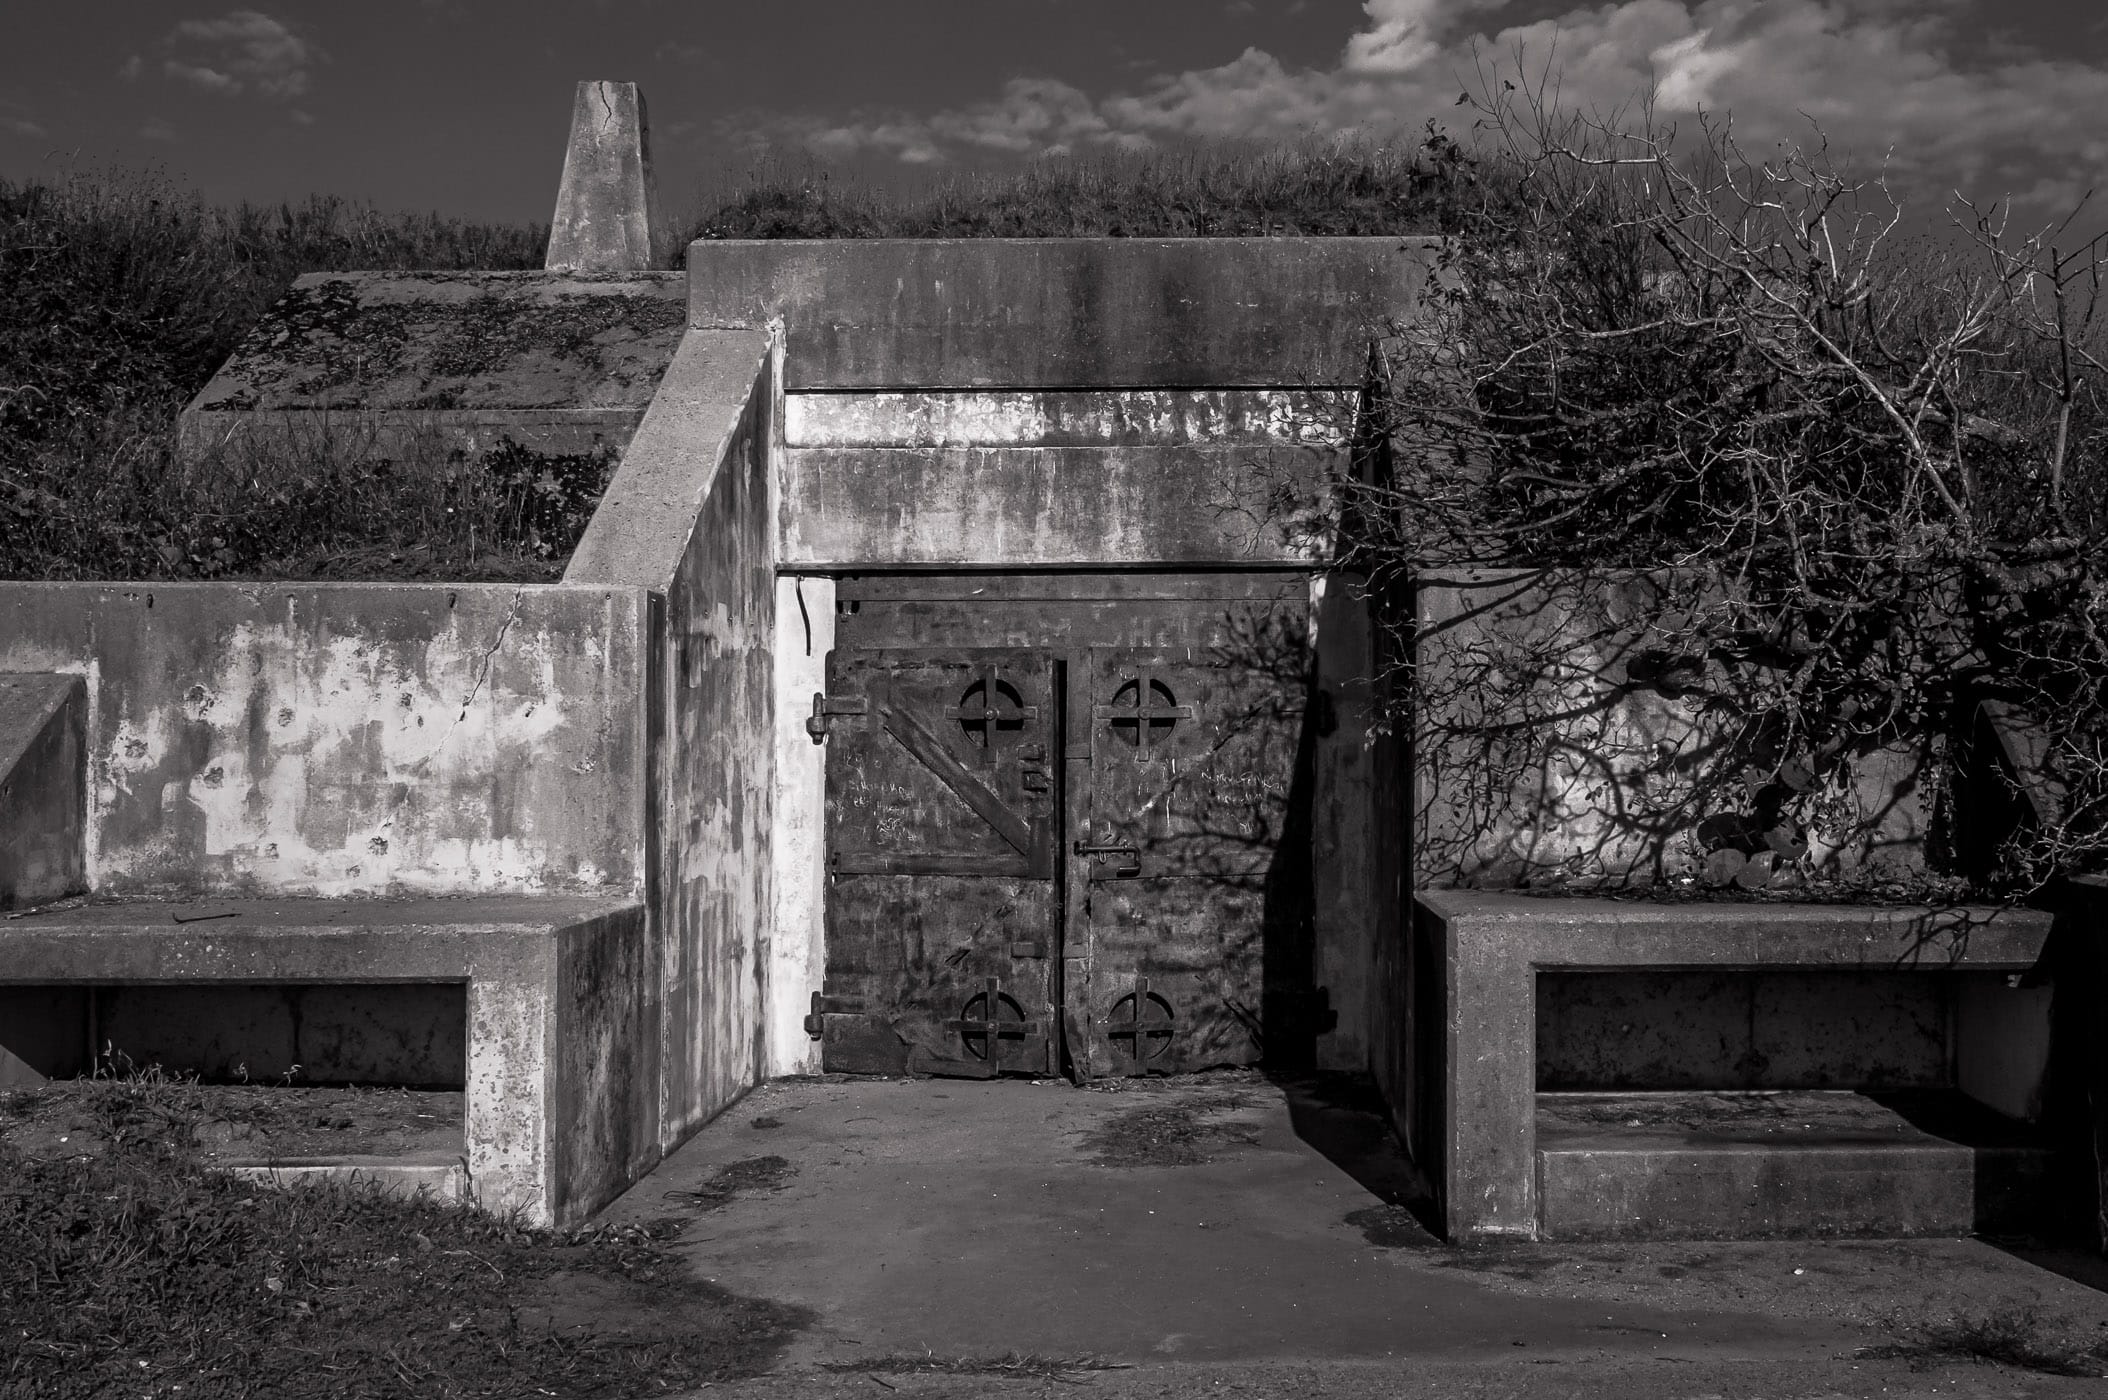 One of the heavily-fortified entrances to Battery 236, located at Fort Travis, Bolivar Peninsula, Texas.  This World War II-era fort was tasked with protecting the Houston Ship Channel from possible enemy incursions.